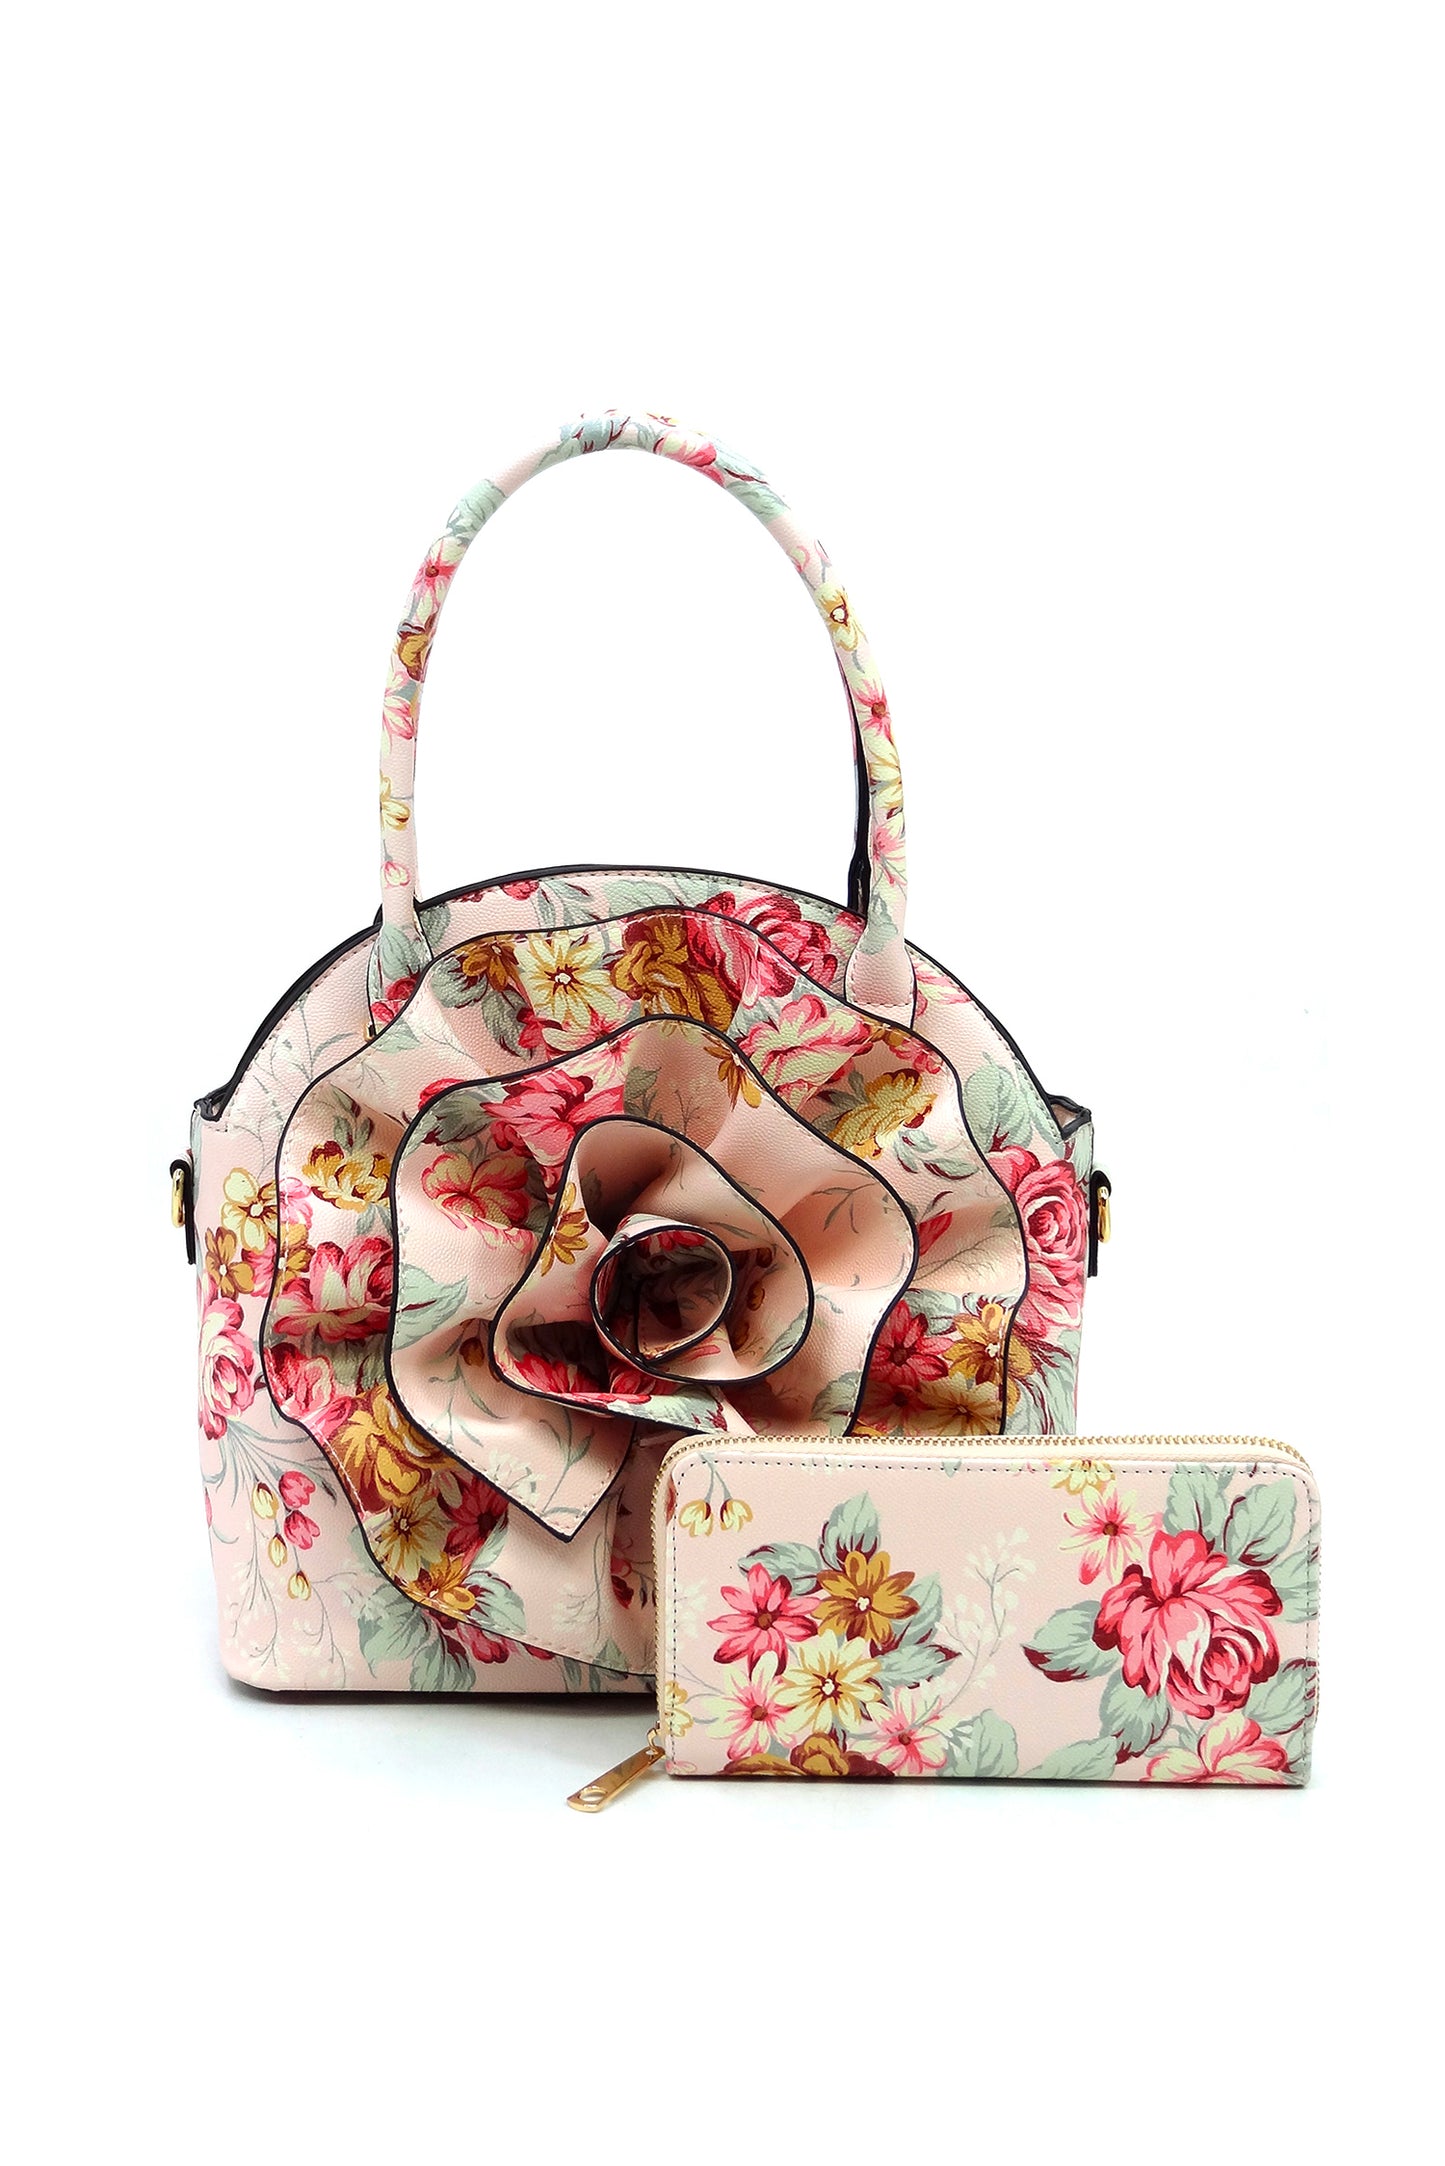 Bella Purse Couture de Roses - Local Florist and Flower Delivery in Tulsa,  OK 74133